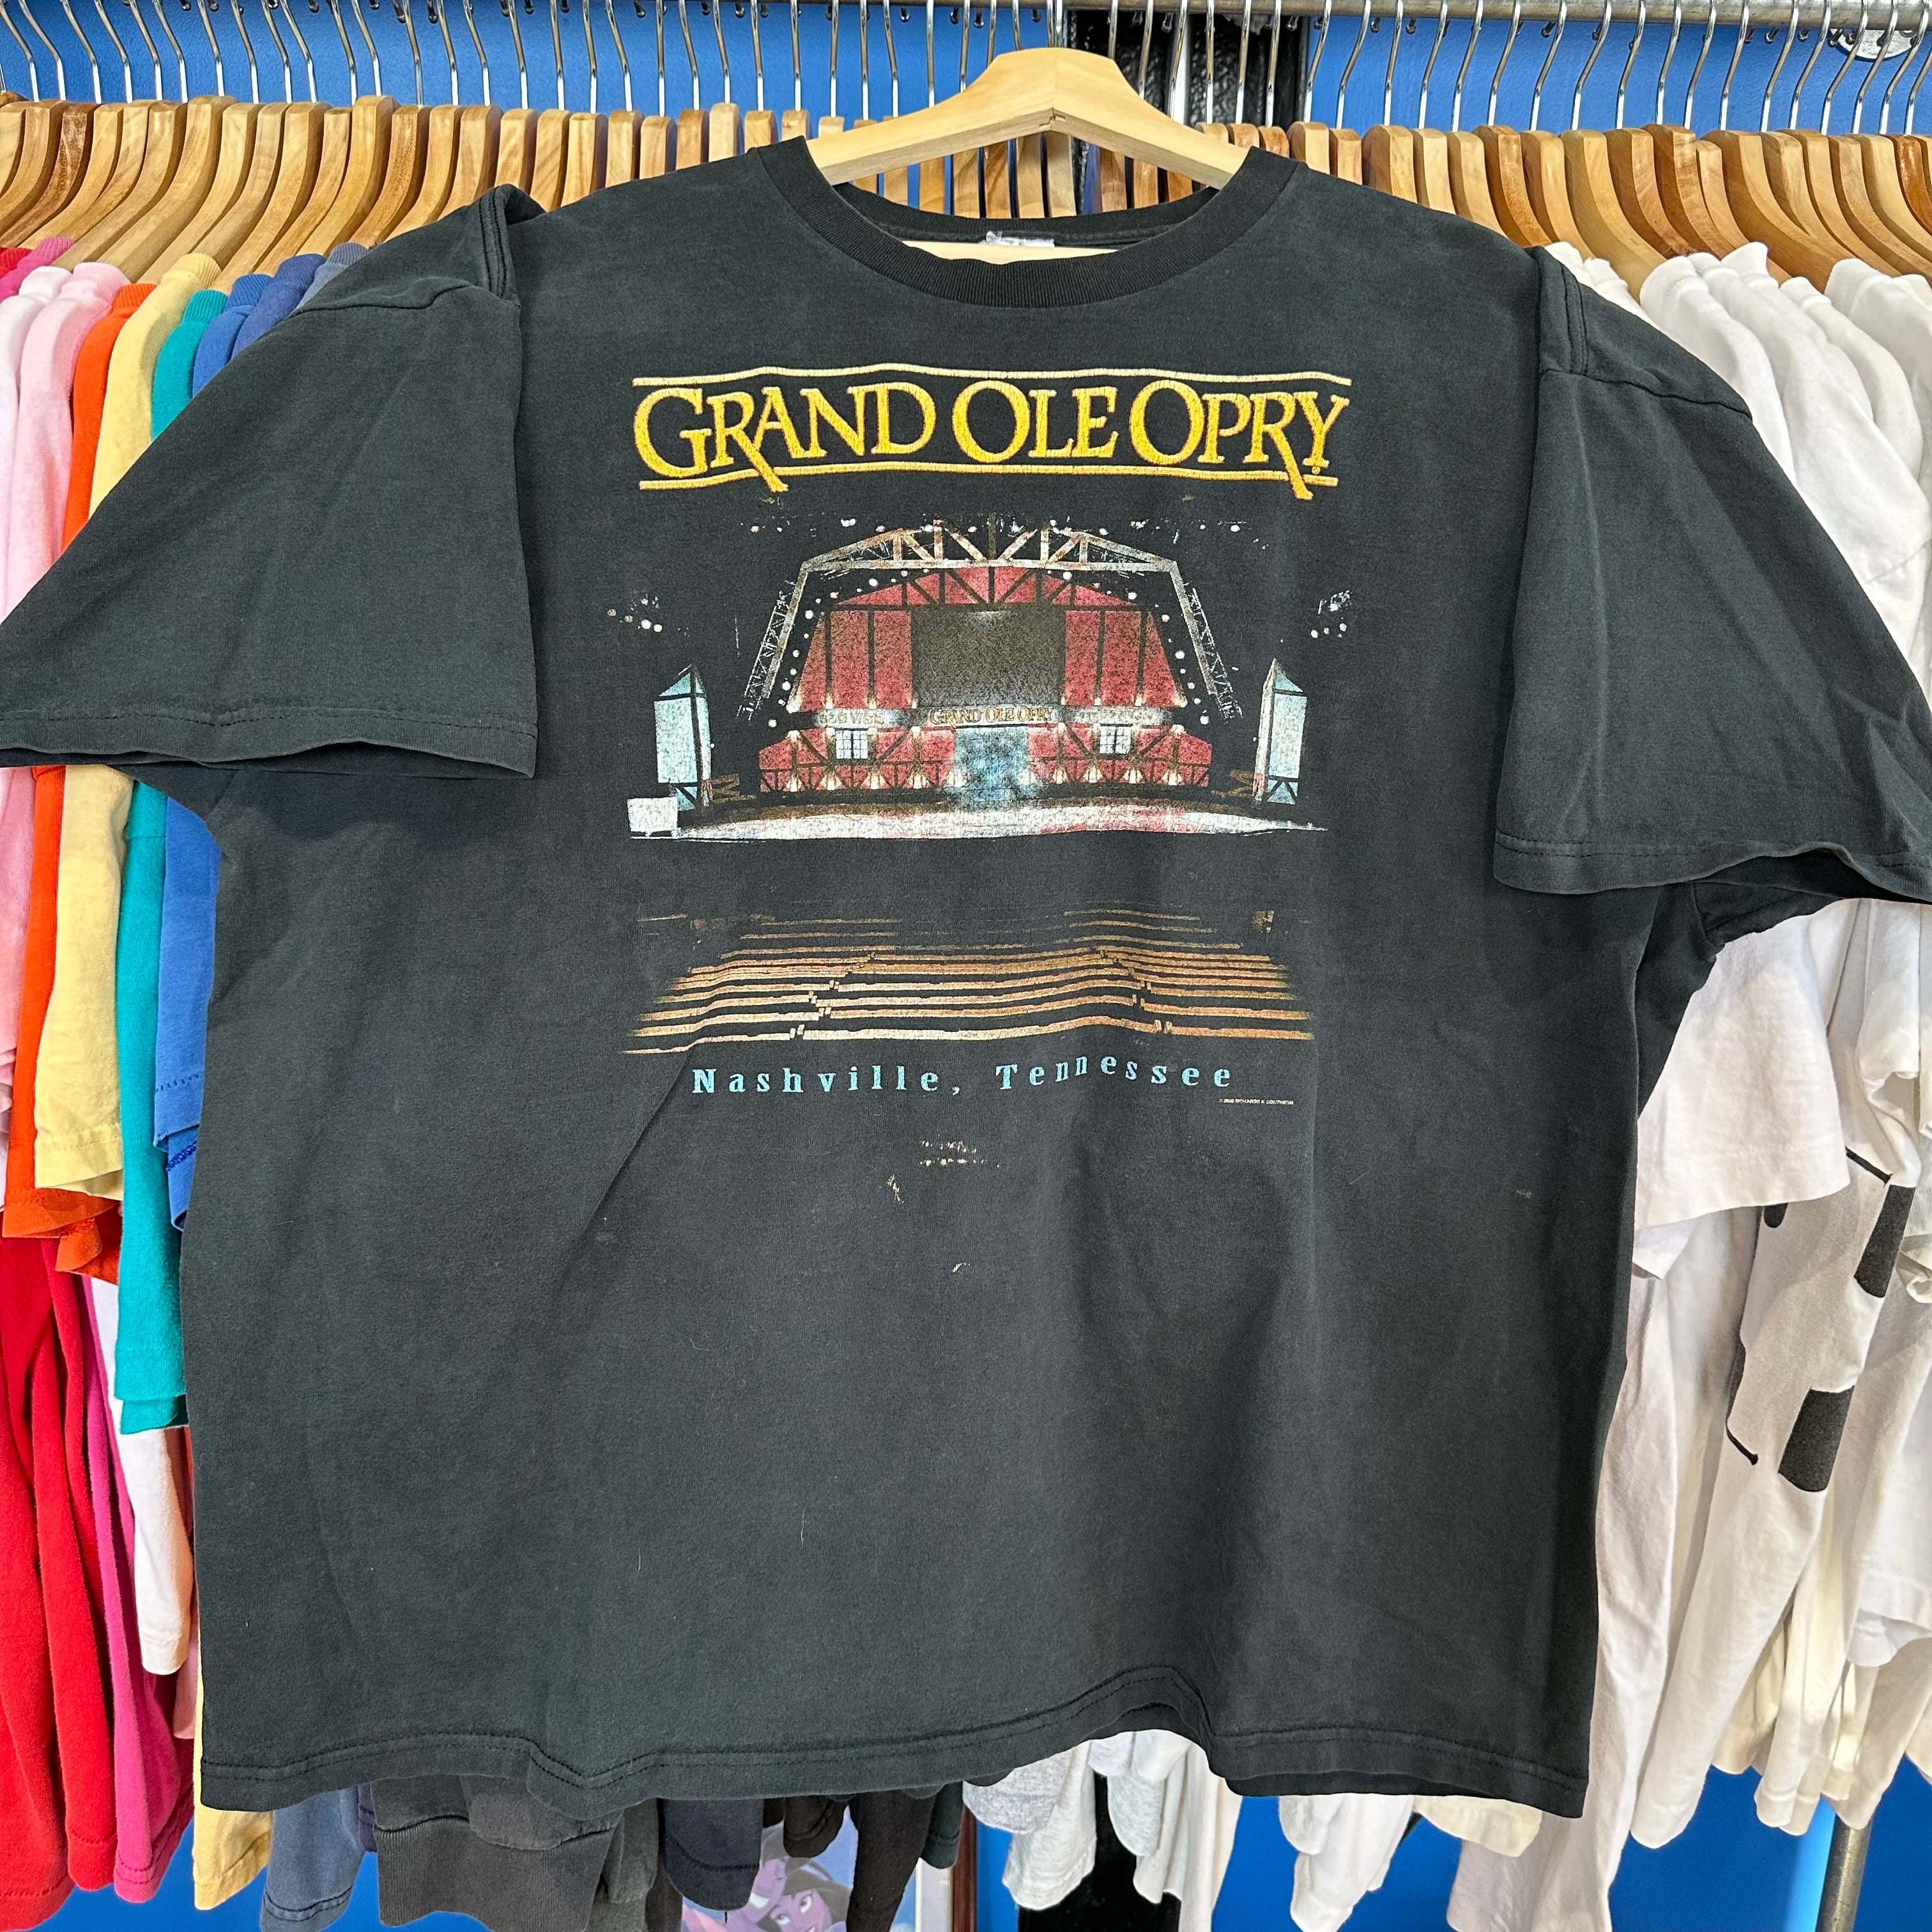 Grand Ole Opry Nashville Tennessee T-Shirt